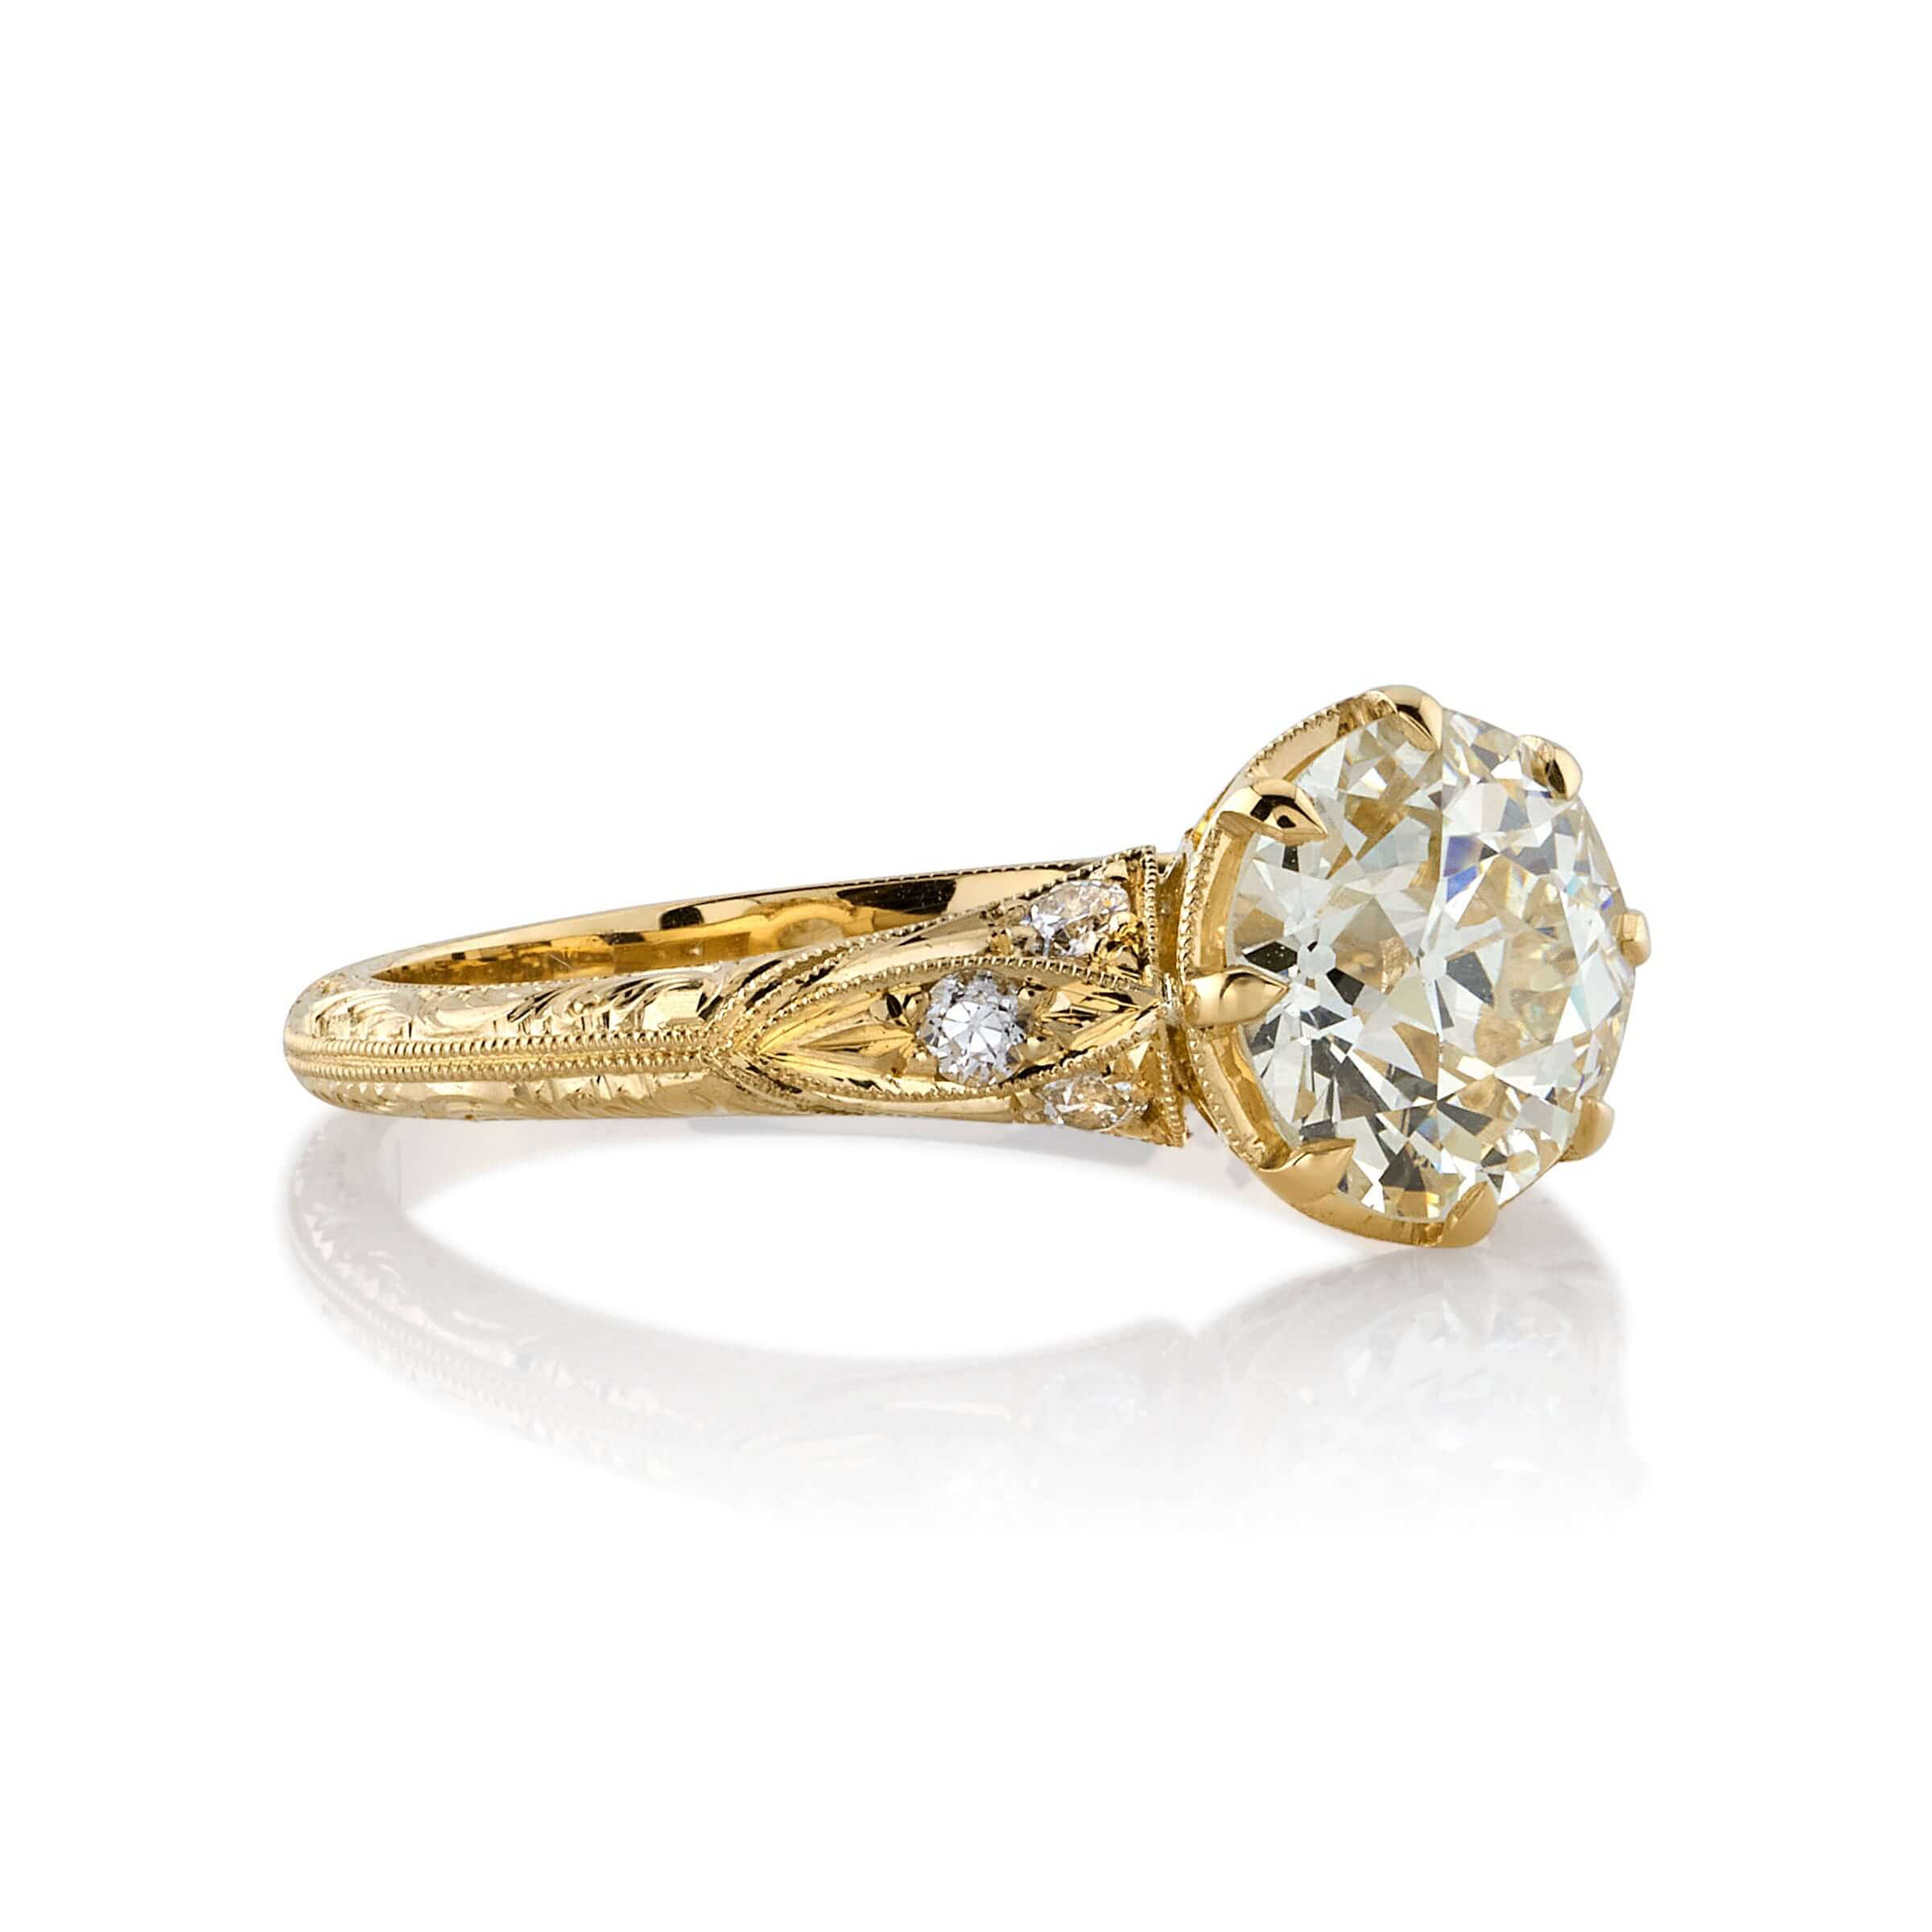 SINGLE STONE NICOLE RING featuring 1.53ct M/VS1 GIA certified old European cut diamond with 0.11ctw old European cut accent diamonds set in a handcrafted 18K yellow gold mounting.